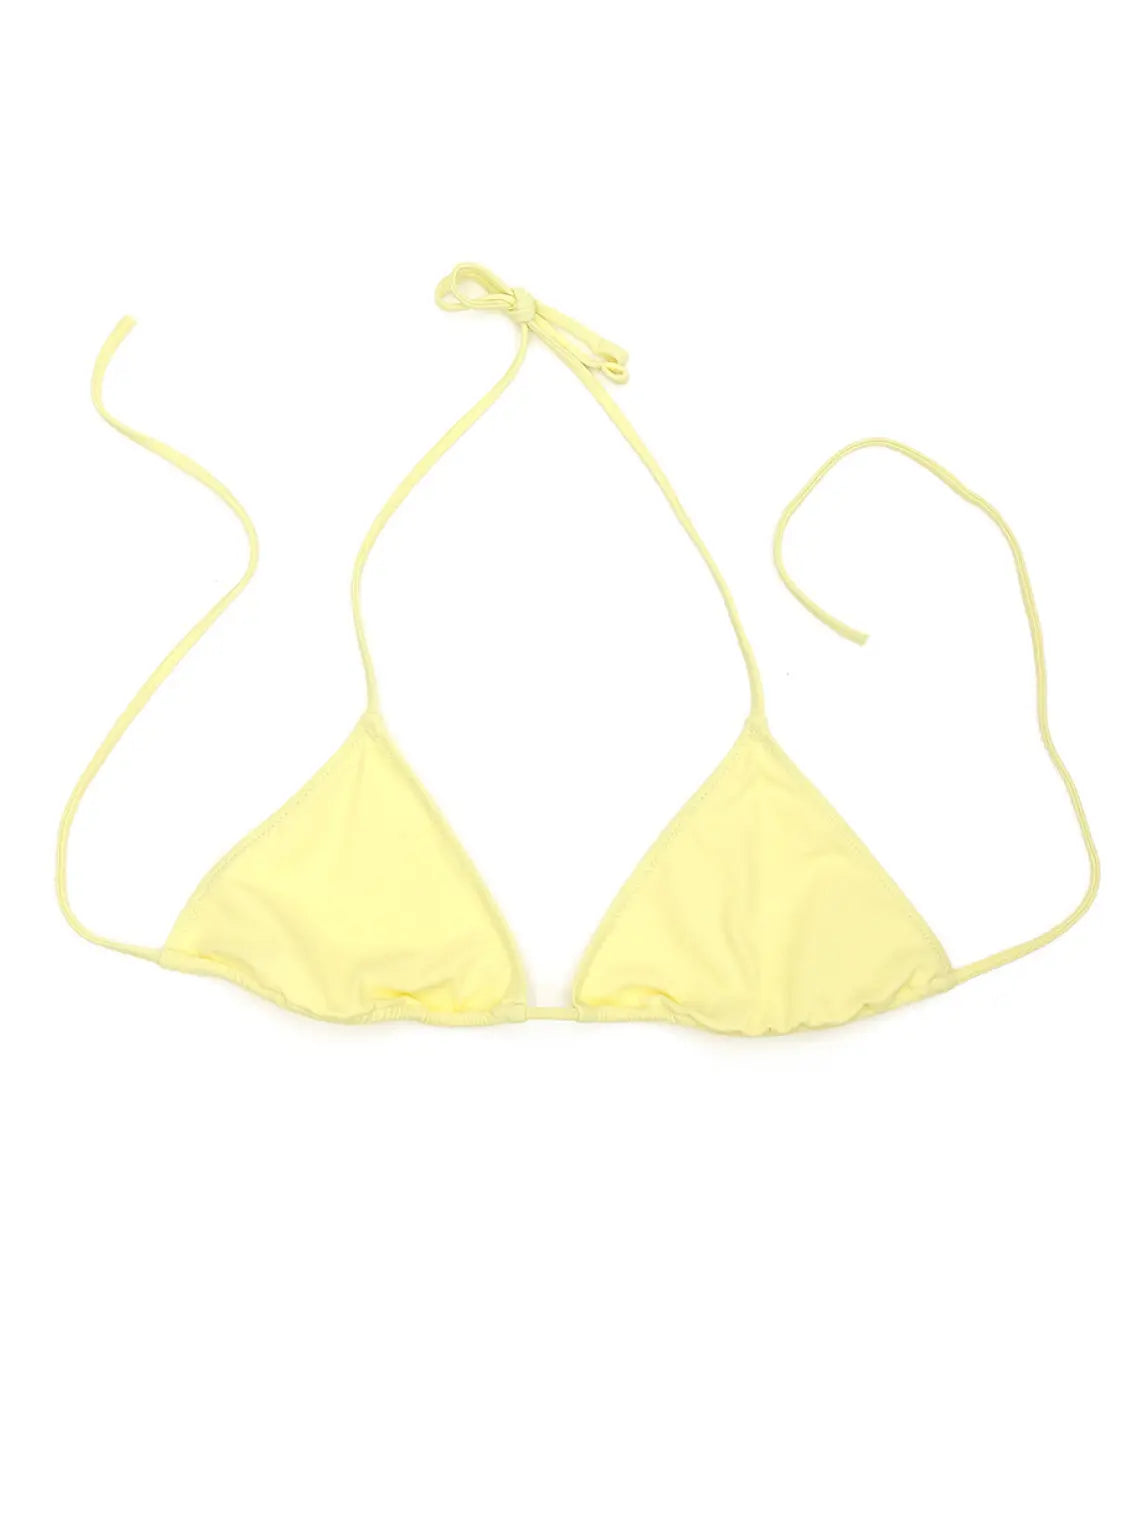 A **Lido Venti Pollen Bikini Top** with triangle-shaped cups and thin adjustable straps is laid flat on a white background. The top, available at **BassalStore** in **Barcelona**, features a halter neck tie and a back tie for secure fitting.